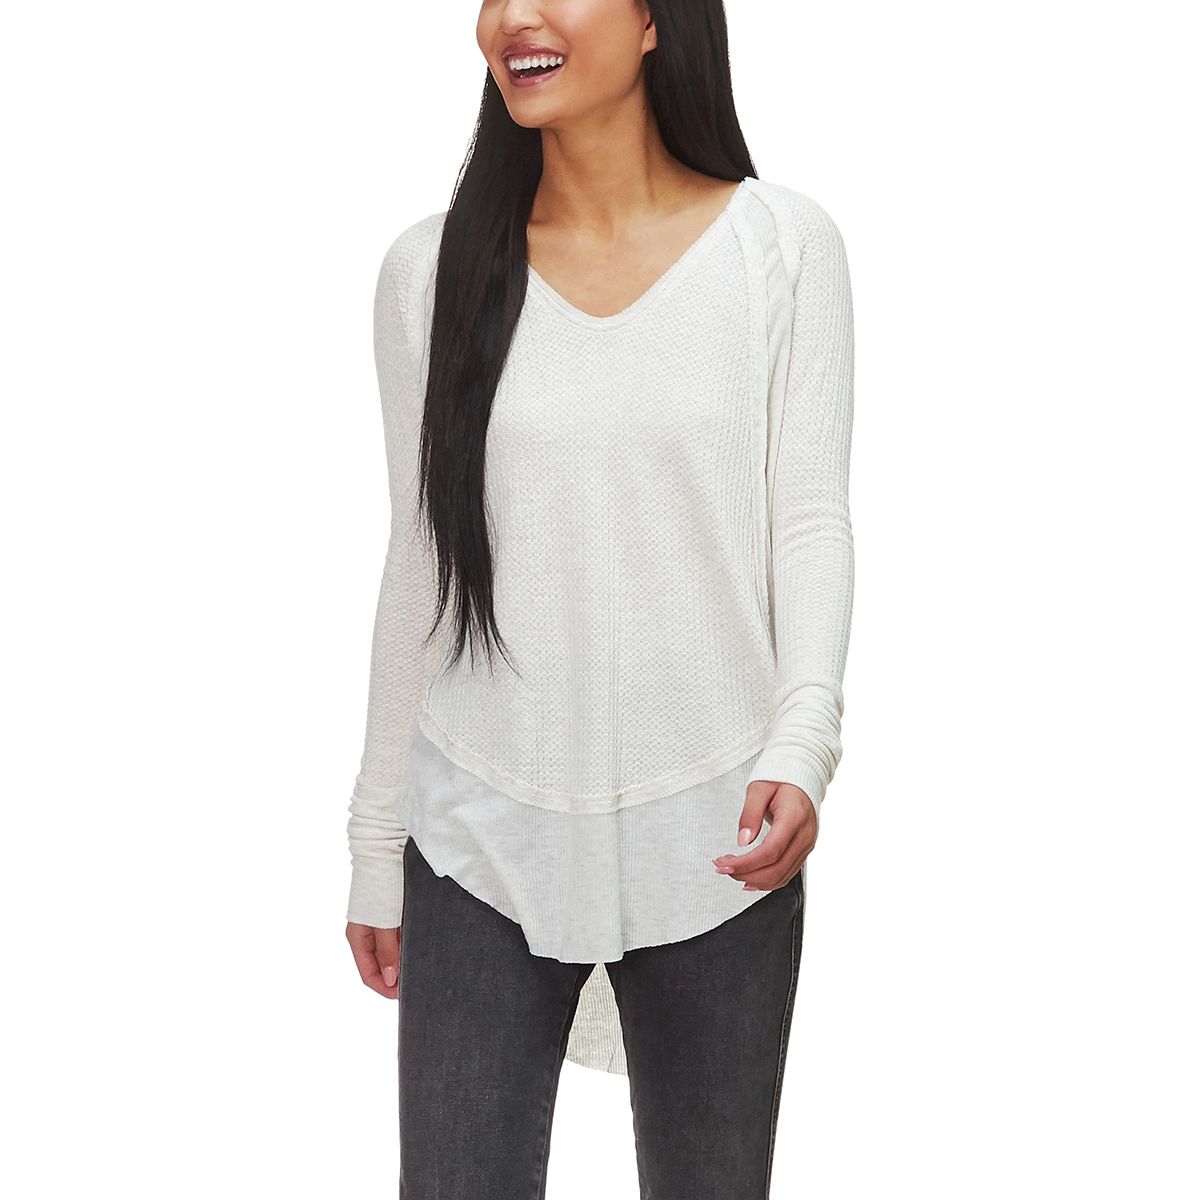 free people catalina thermal top